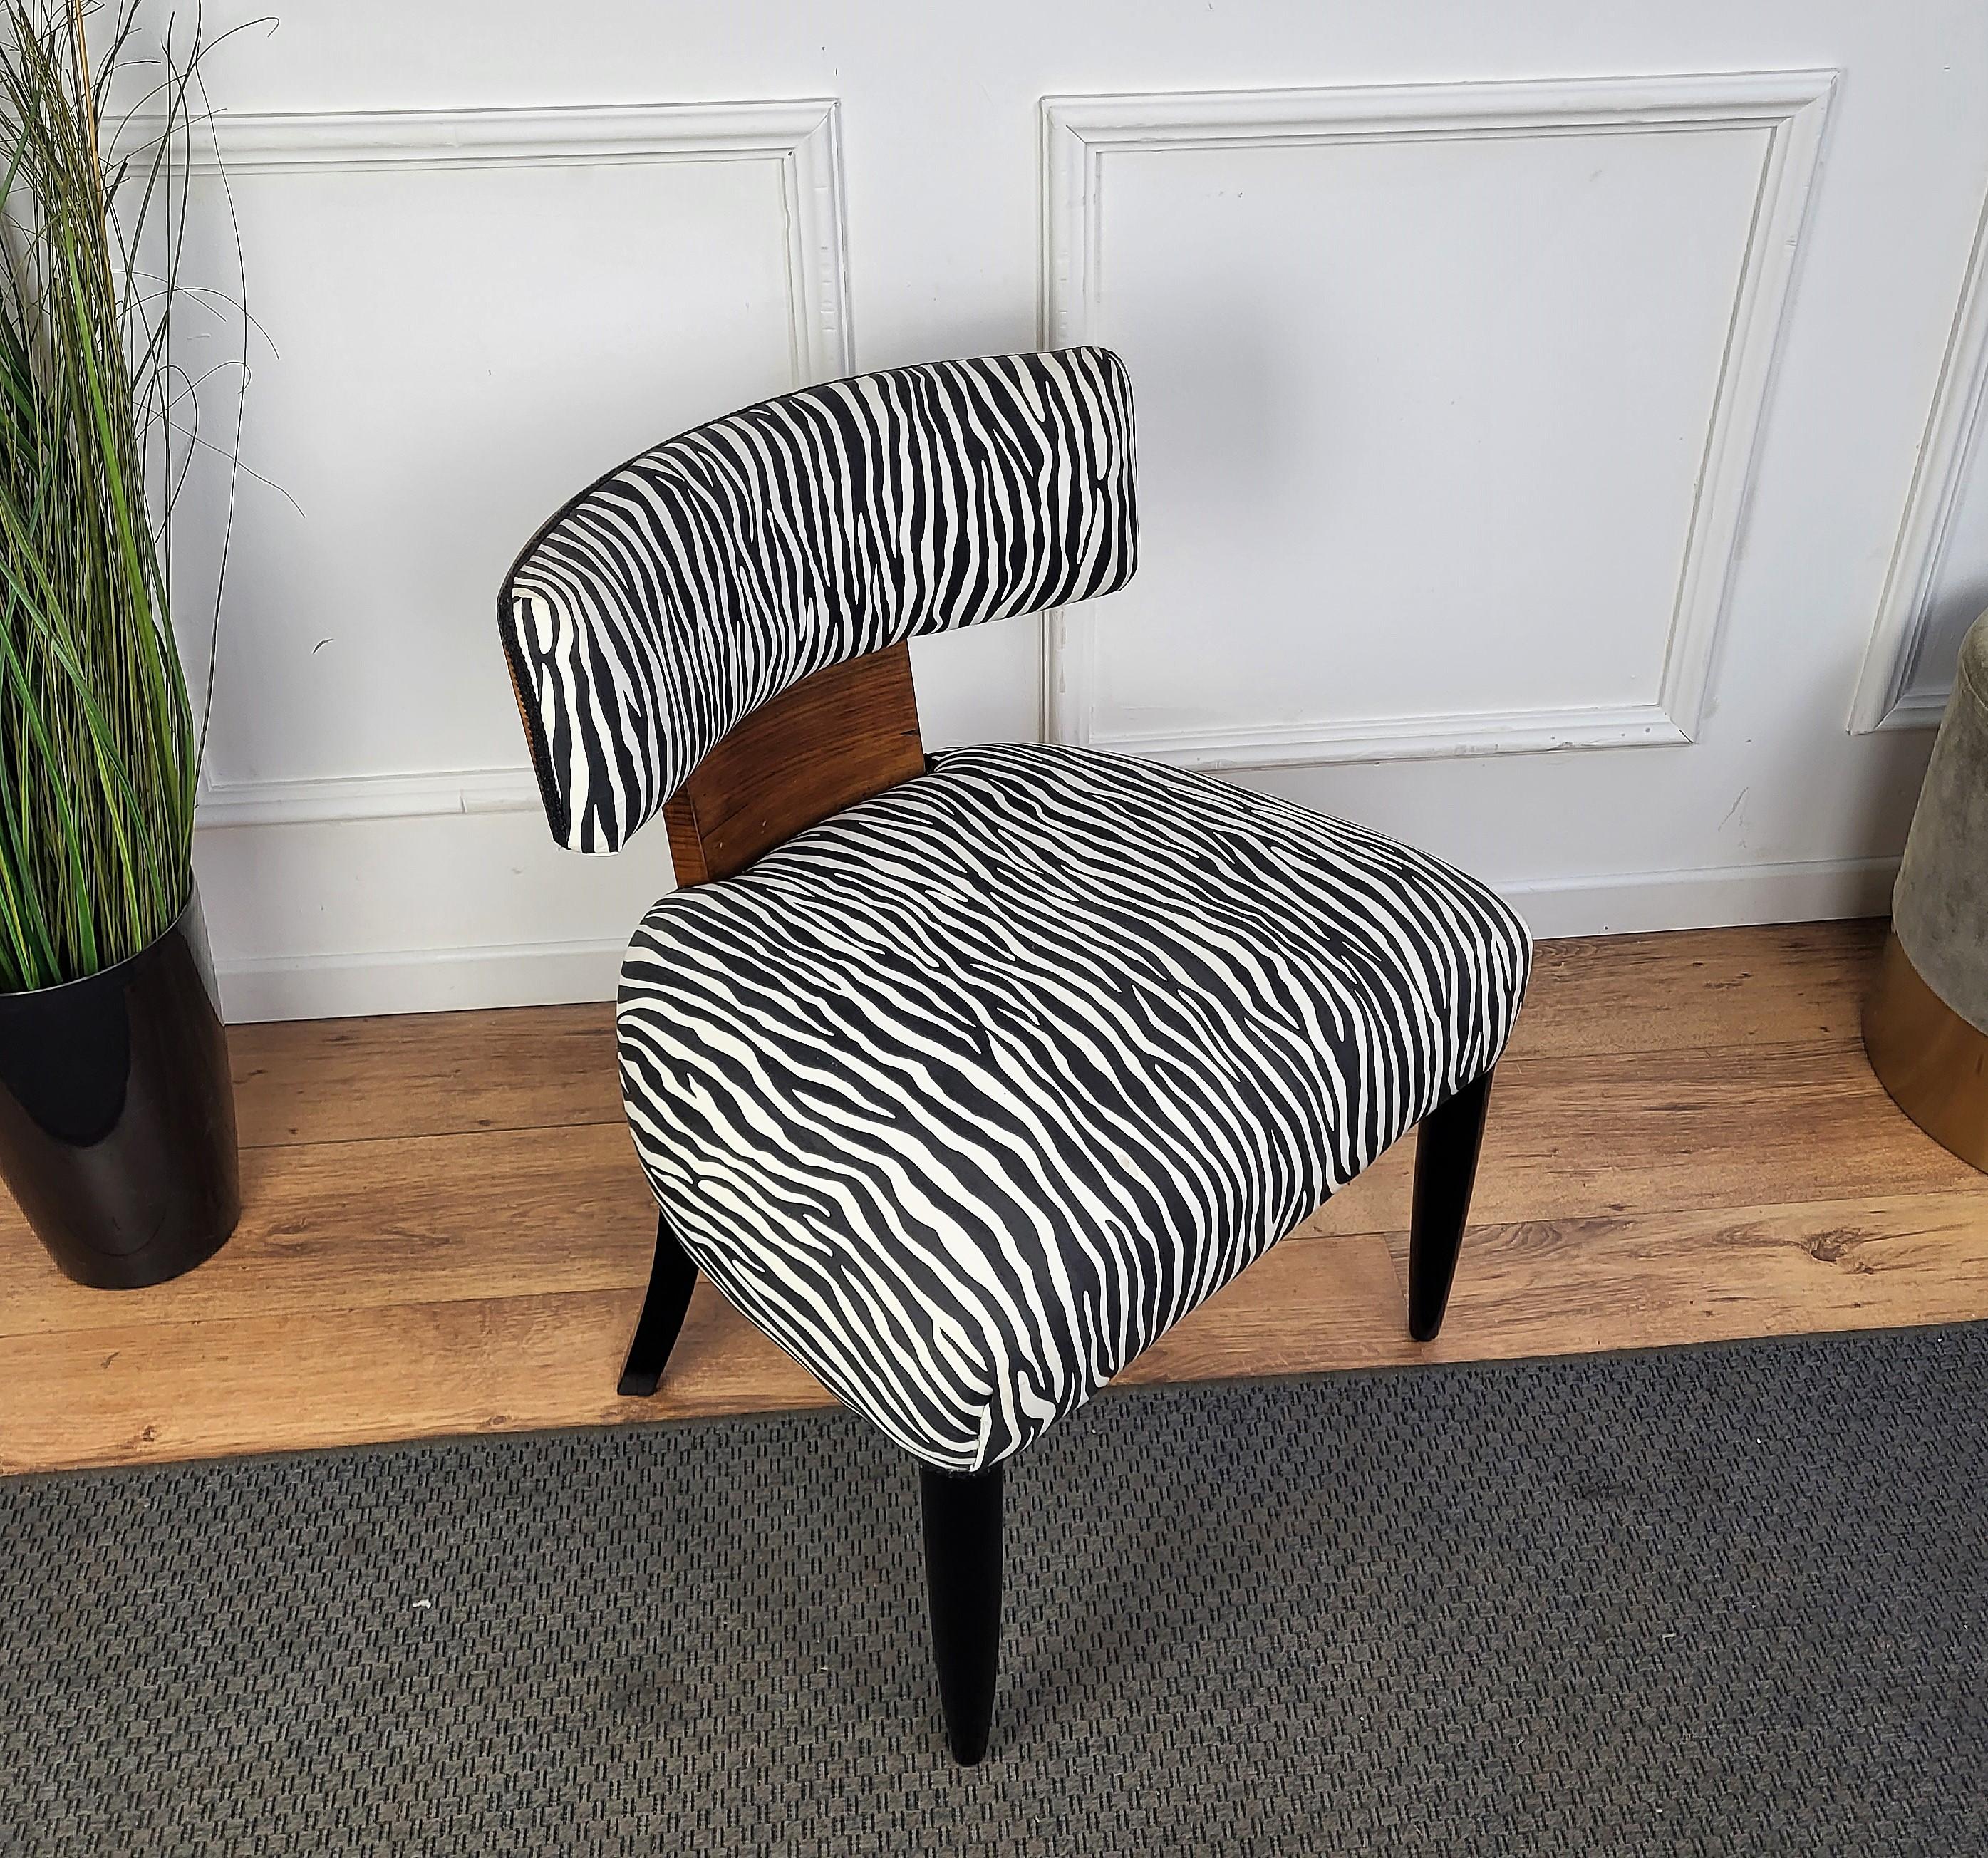 Italian Mid-Century Art Deco Briar Walnut Wood Animalier Zebra Upholstered Chair In Good Condition For Sale In Carimate, Como